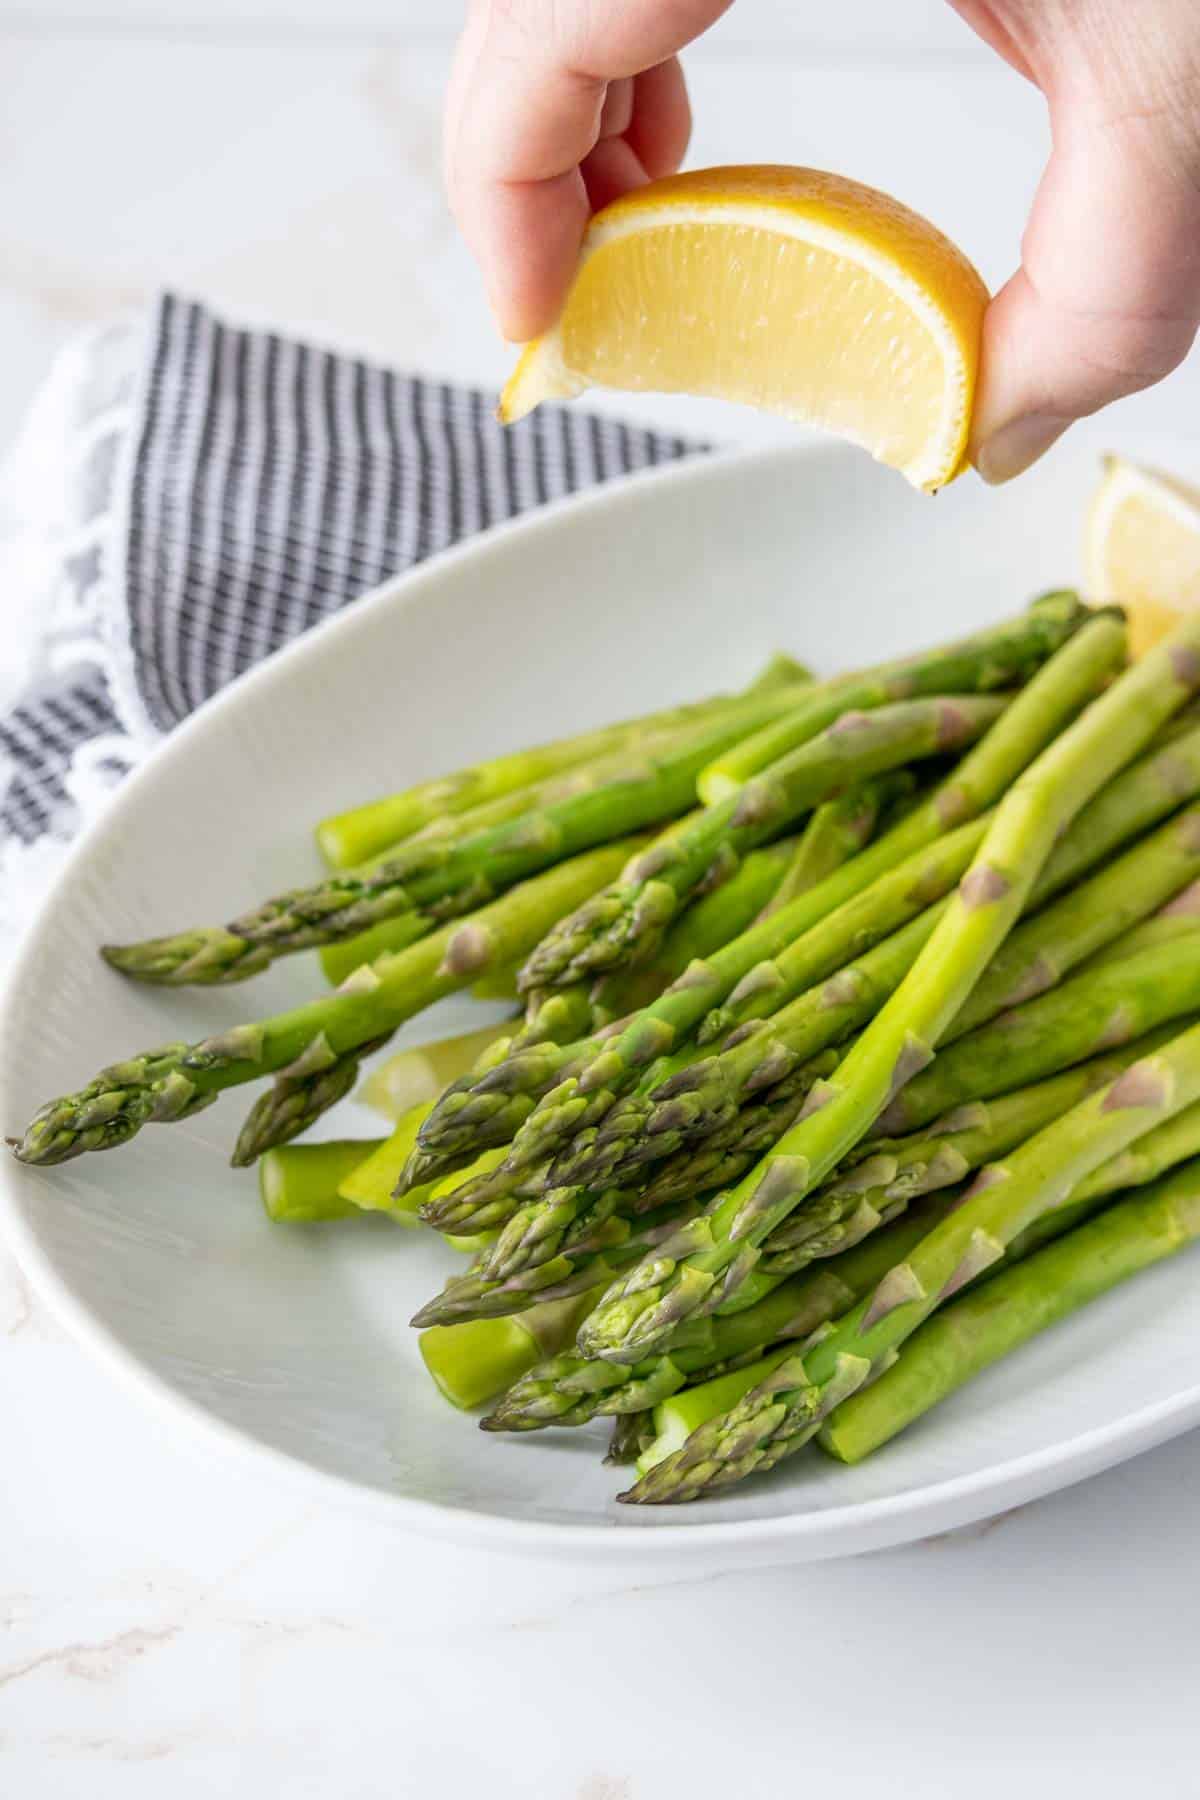 Caucasian hand squeezing lemon onto a platter of steamed asparagus.